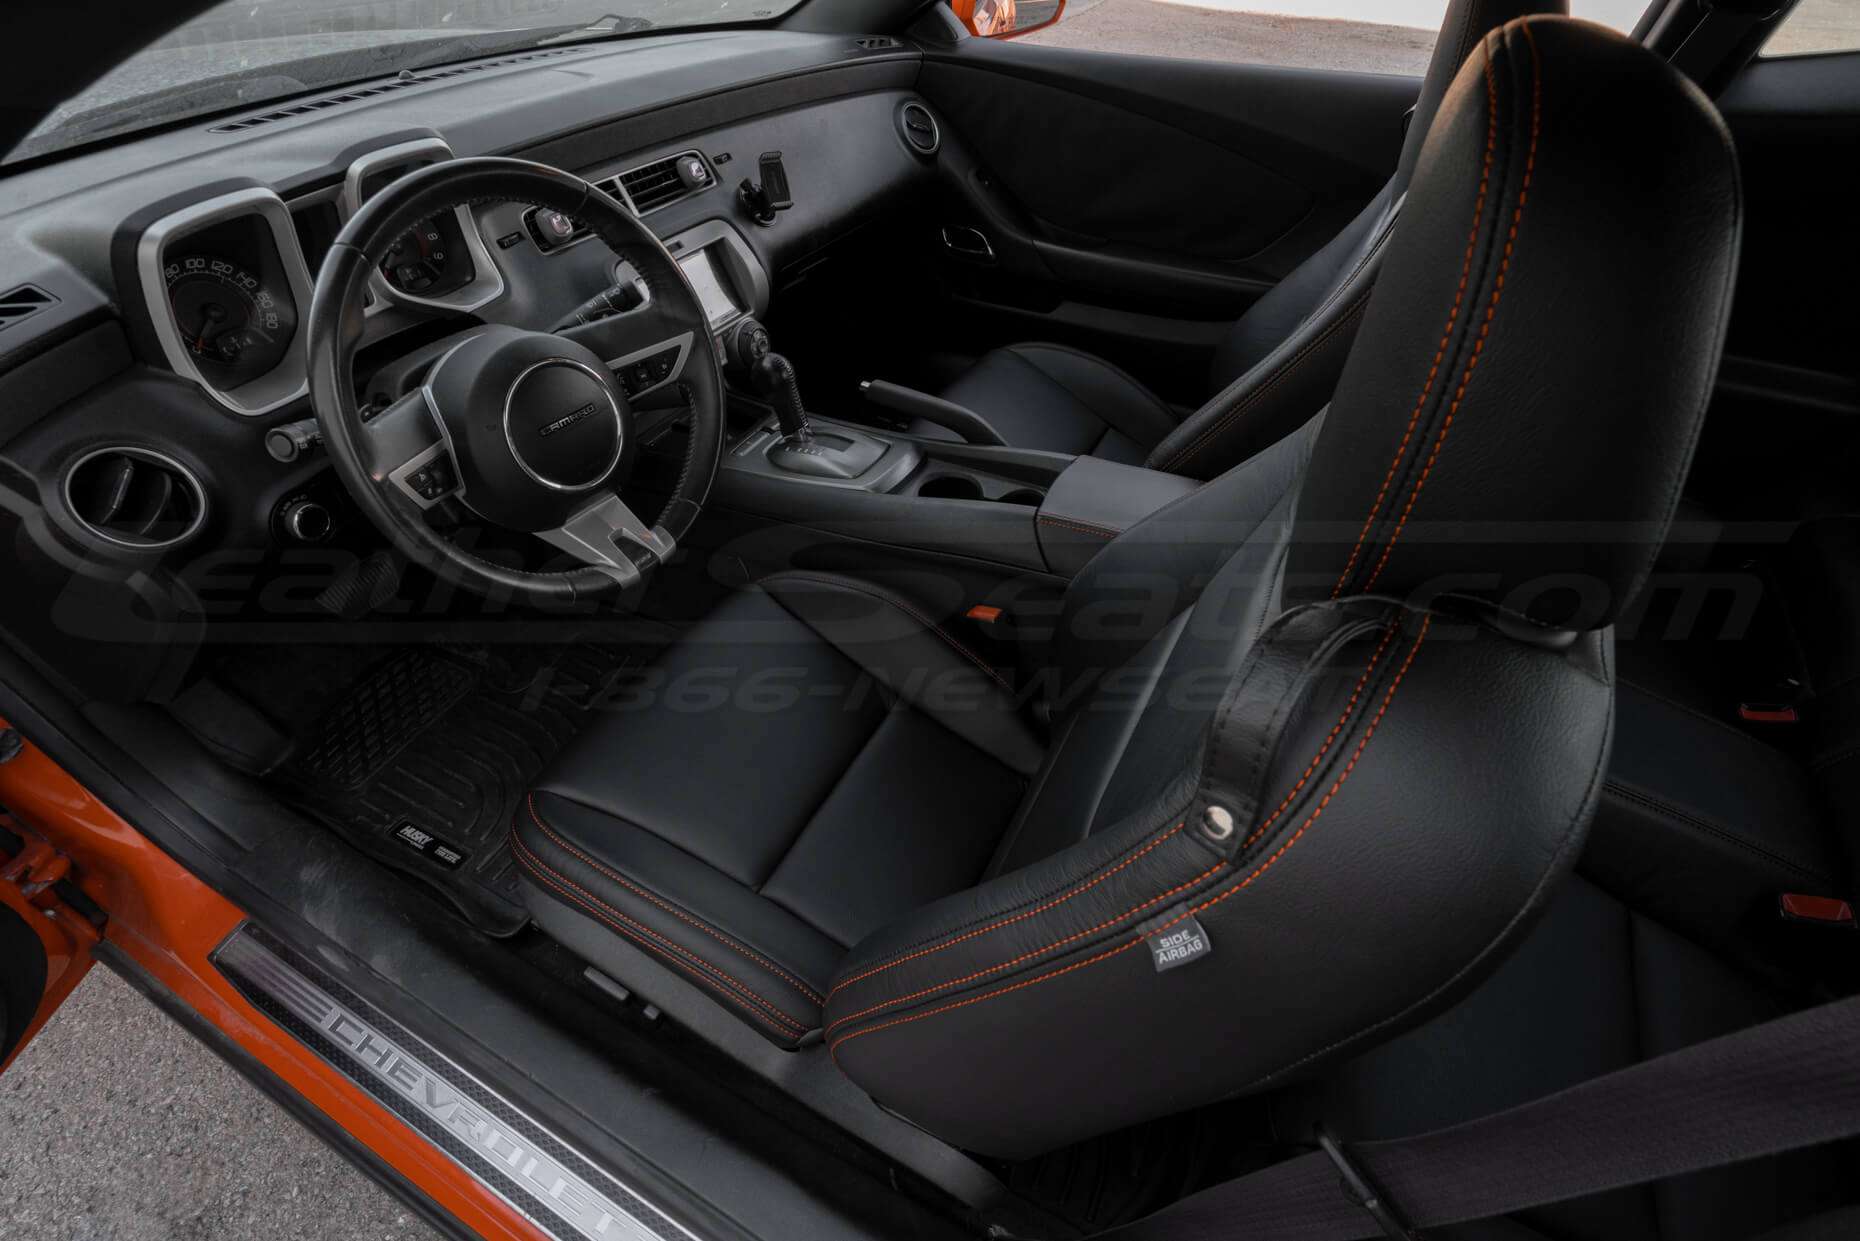 Chevy Camaro installed leather seats - Black - Top down of front driver'seat